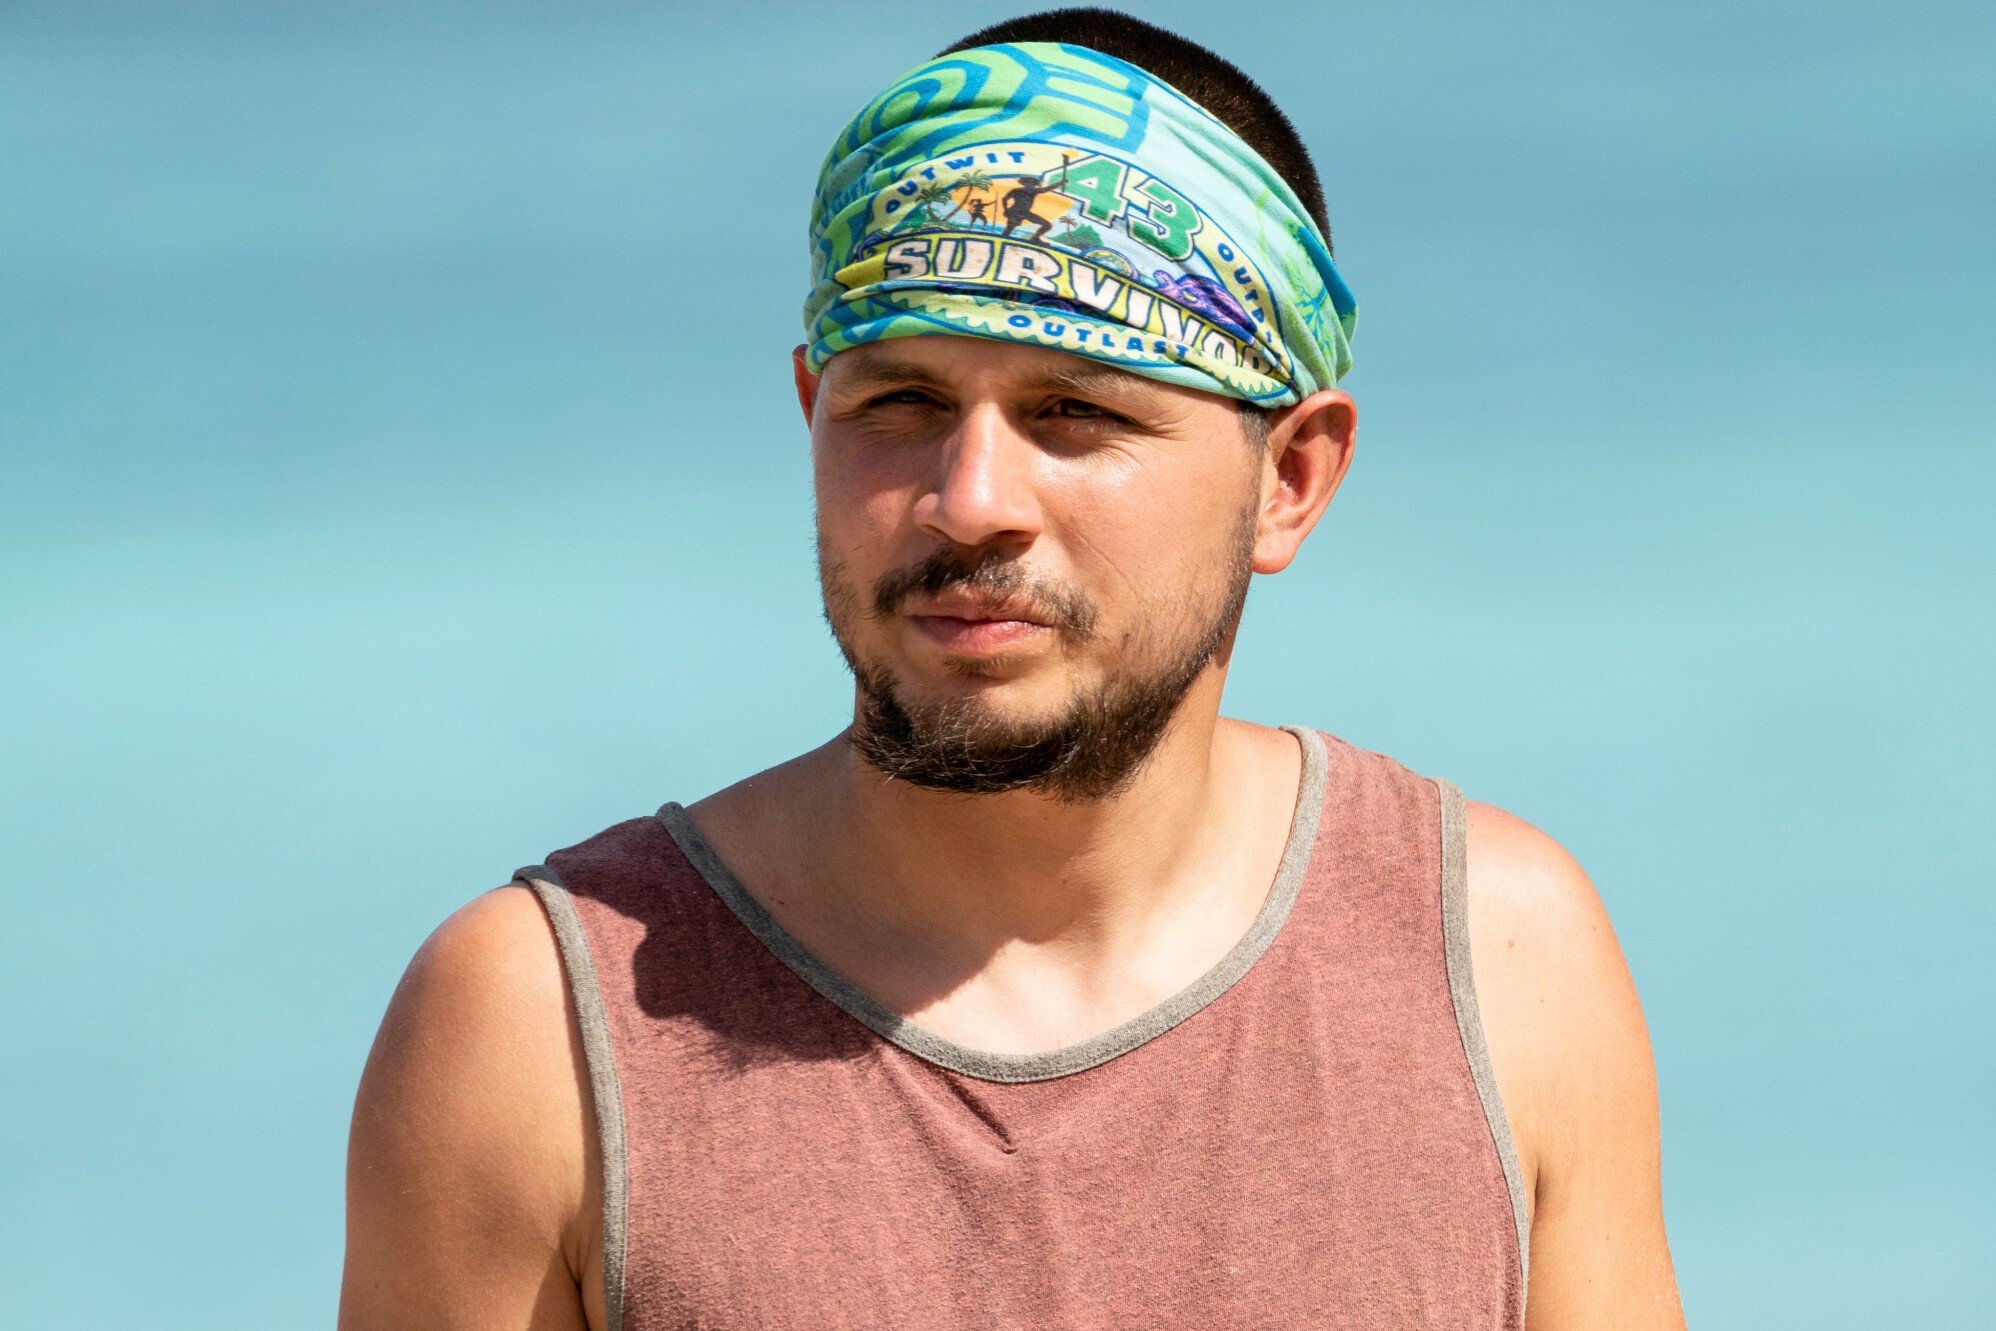 Jesse Lopez, who stars in 'Survivor' Season 43 on CBS, wears a faded red tank top and his blue 'Survivor' buff on his head.